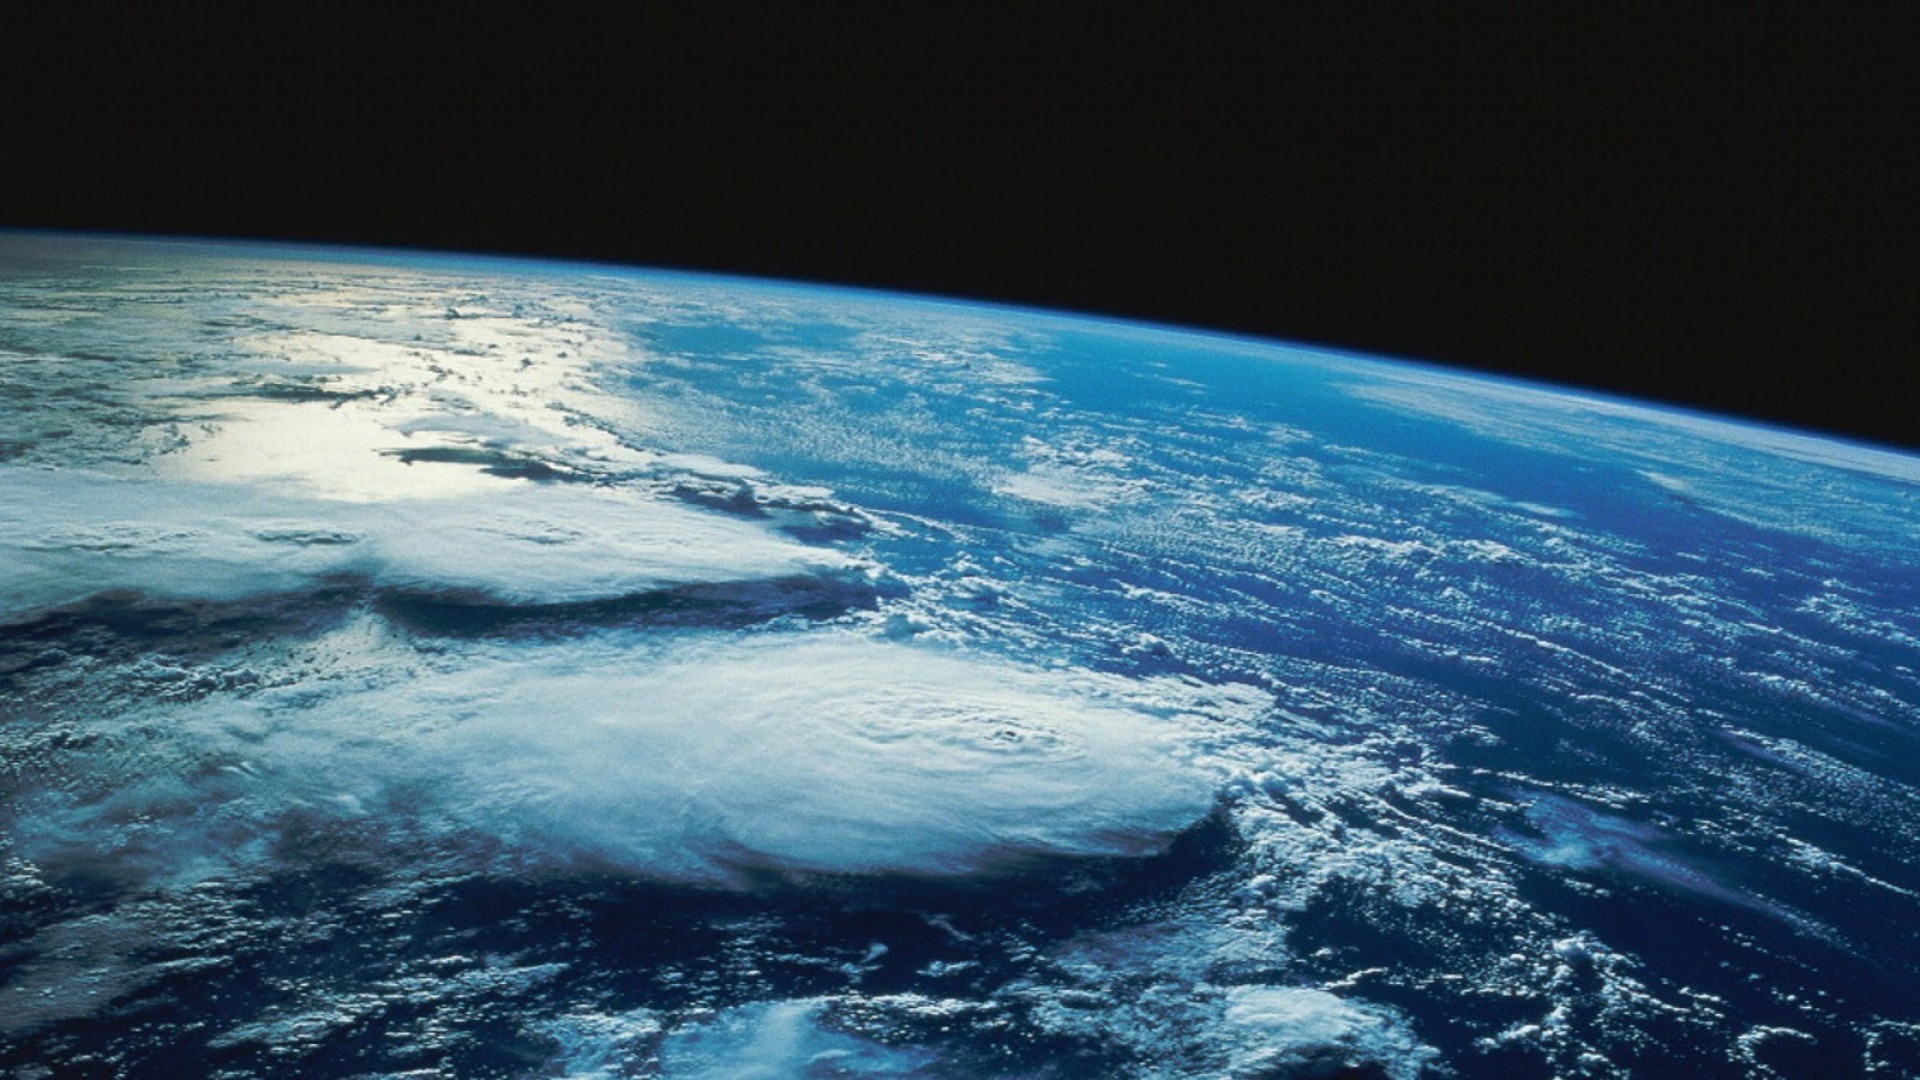 Earth From Space Wallpaper 1920x1080